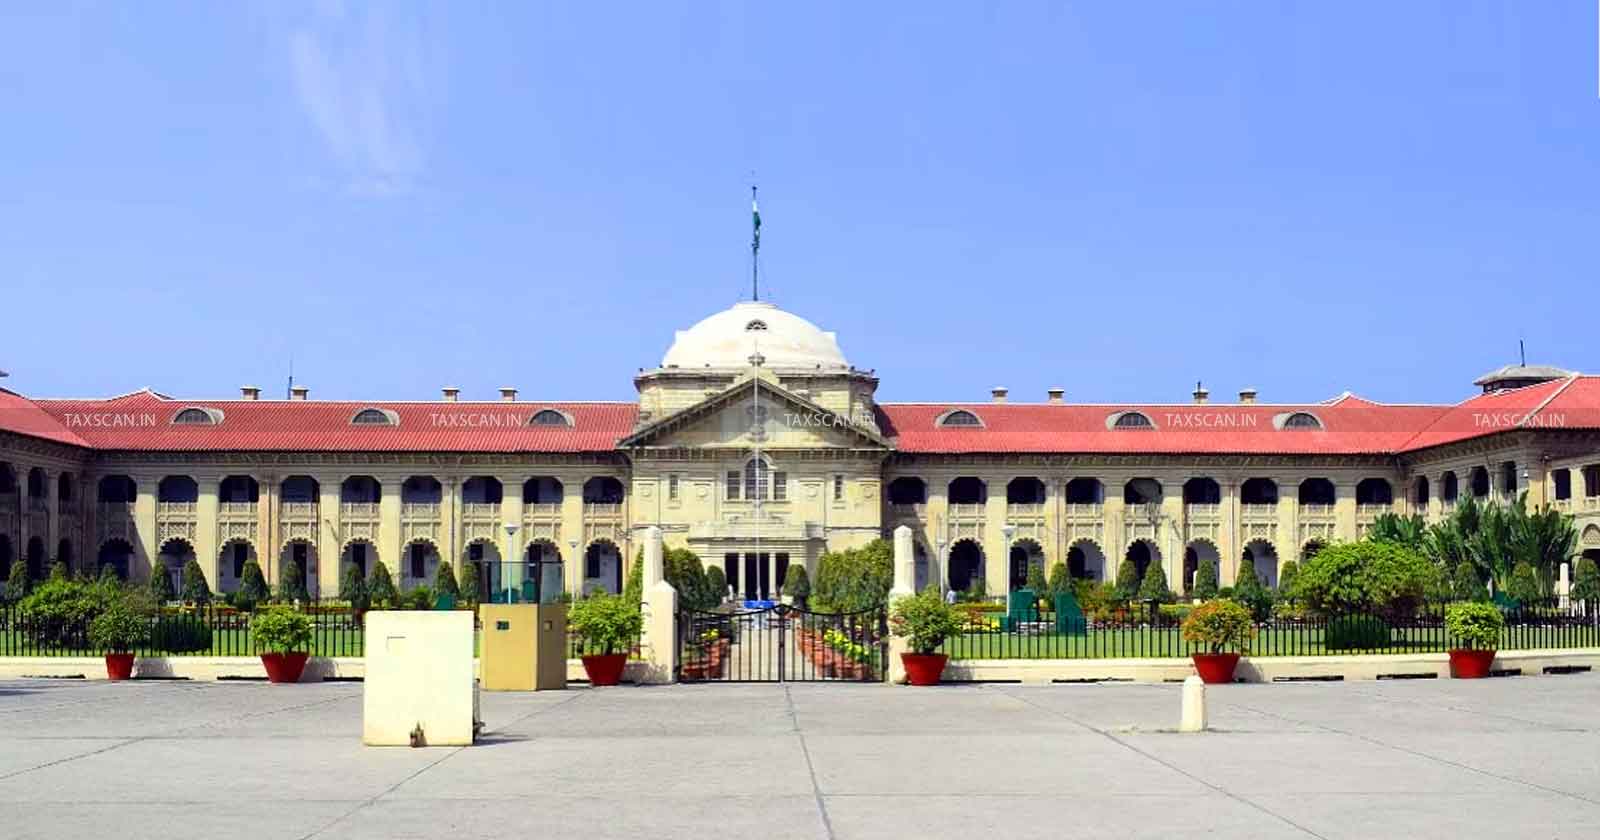 allahabad hc - allahabad high court - cgst act - Section 14 of Limitation Act - Allahabad HC CGST Appeal - taxscan